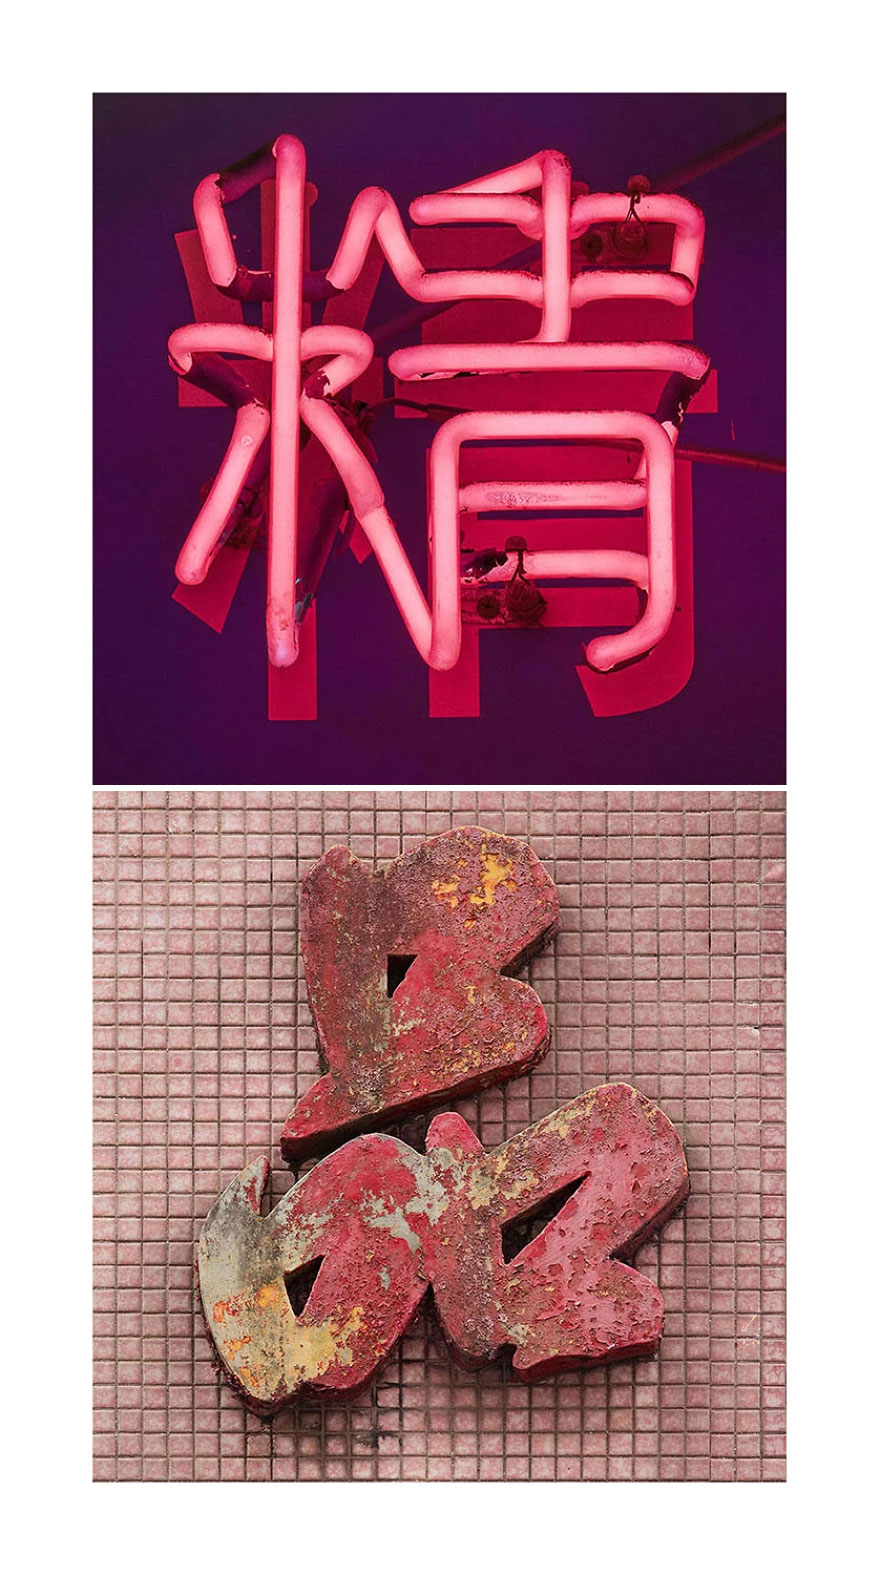 I Took 1,000 Photos Of Hong Kong’s Old Shop Signs And I Have Been Learning Chinese To Create This Visual Poetry